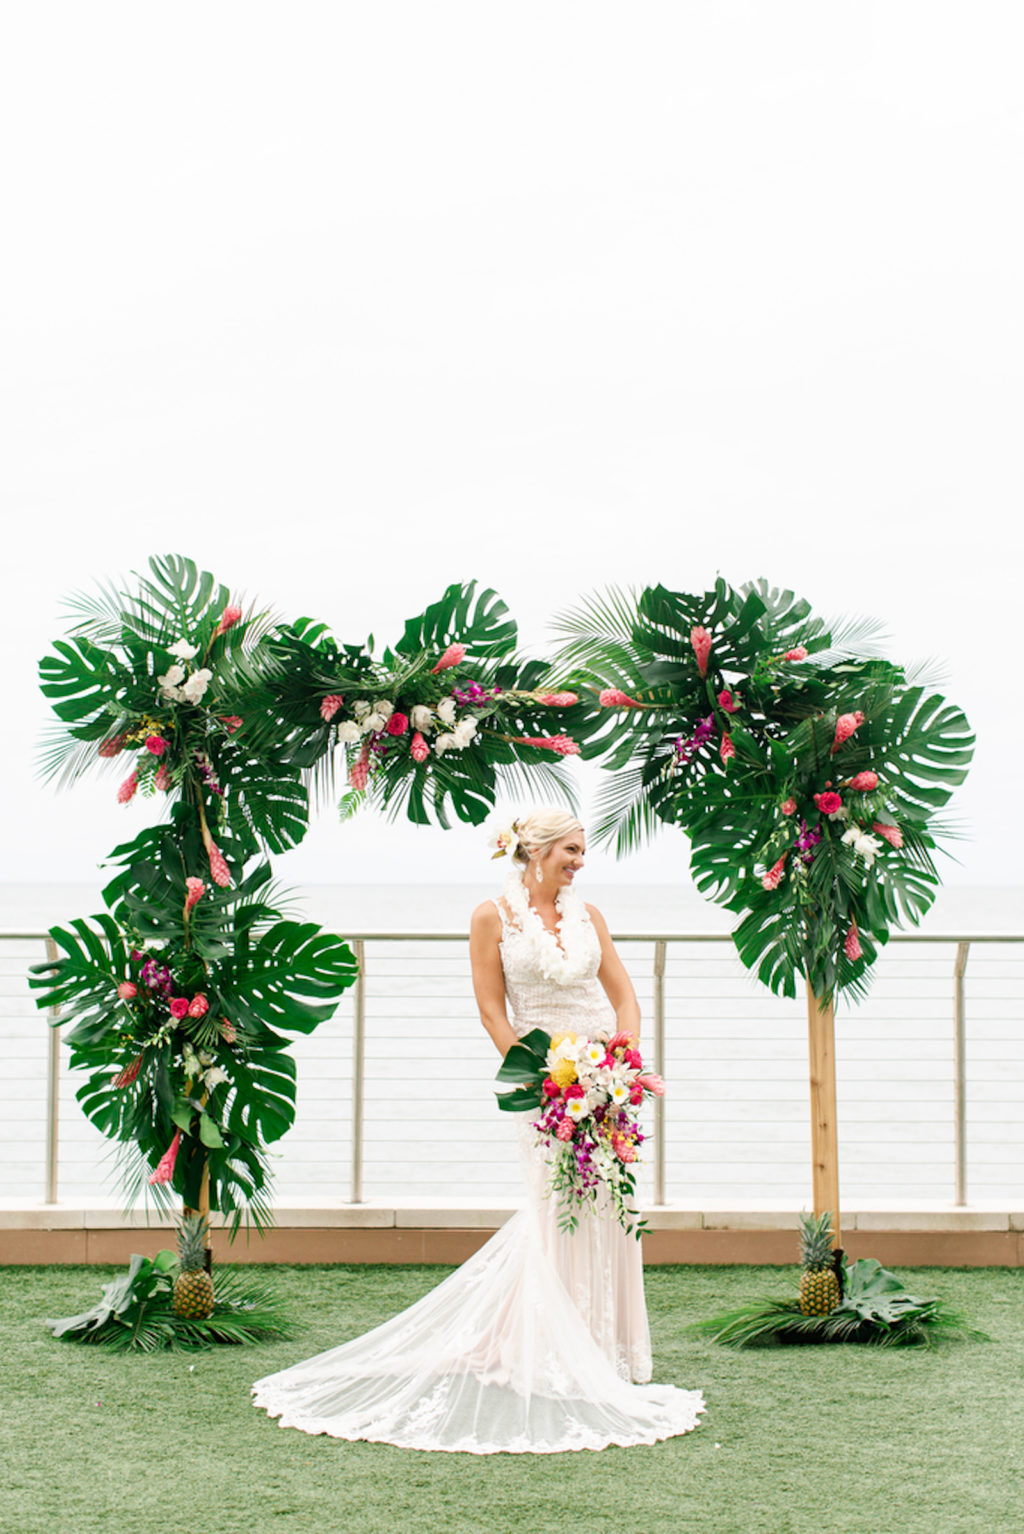 Tropical Elegant Bride Under Arch with Monstera Palm Tree Leaves, Pink Ginger, Purple Orchids, White Flowers | Tampa Bay Wedding Planner Special Moments Event Planning | Waterfront Clearwater Beach Opal Sands Resort